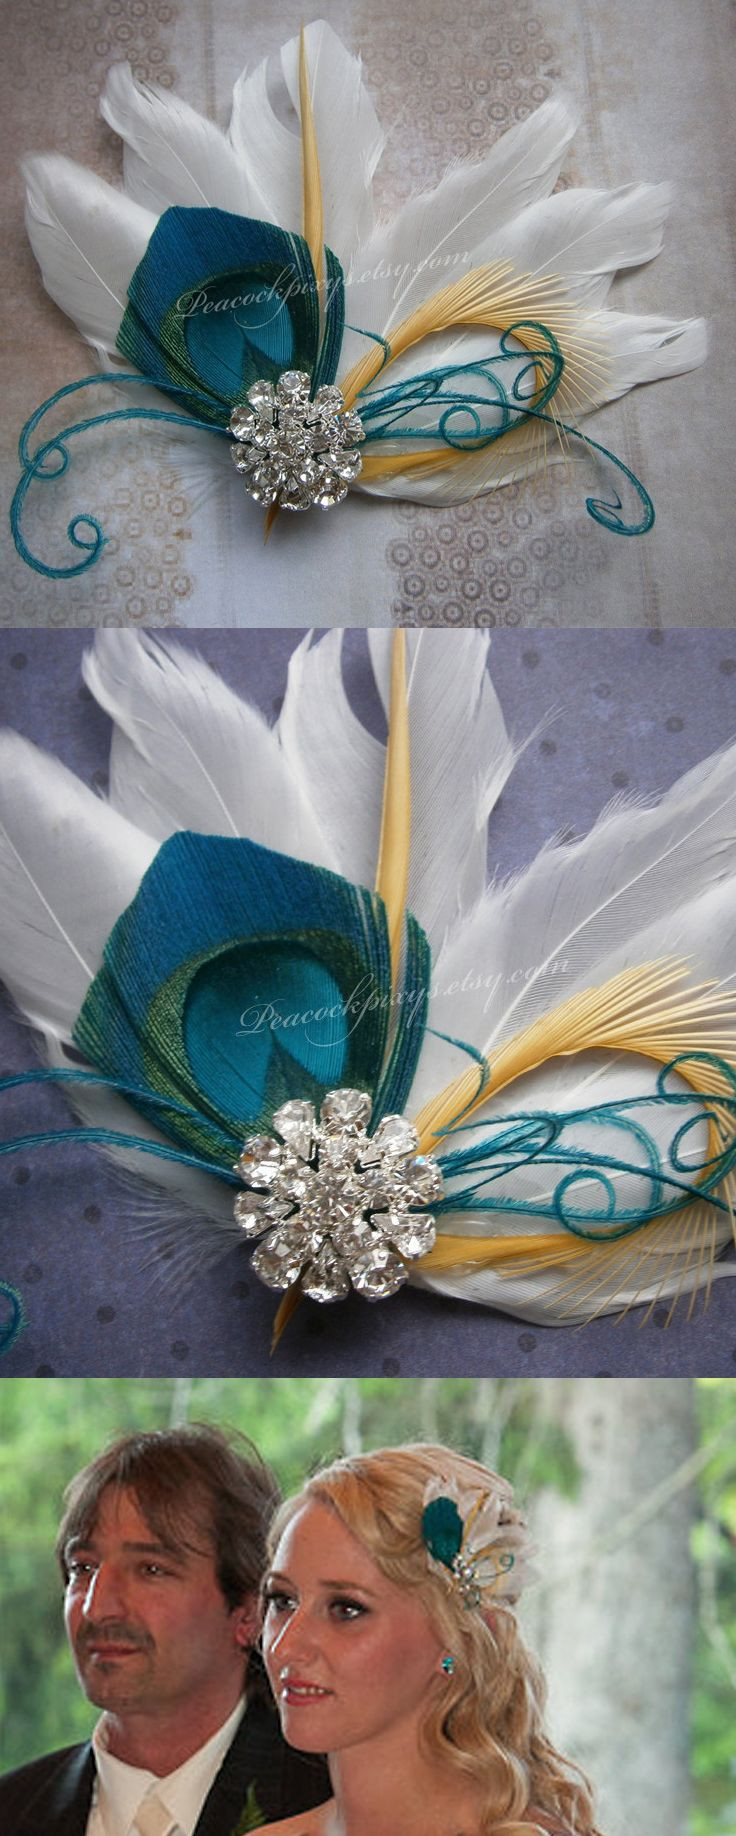 21 Lovable Peacock Feathers In Vase 2024 free download peacock feathers in vase of island inspired feather hair clip in white indian feathers accented with regard to island inspired feather hair clip in white indian feathers accented with a uniq